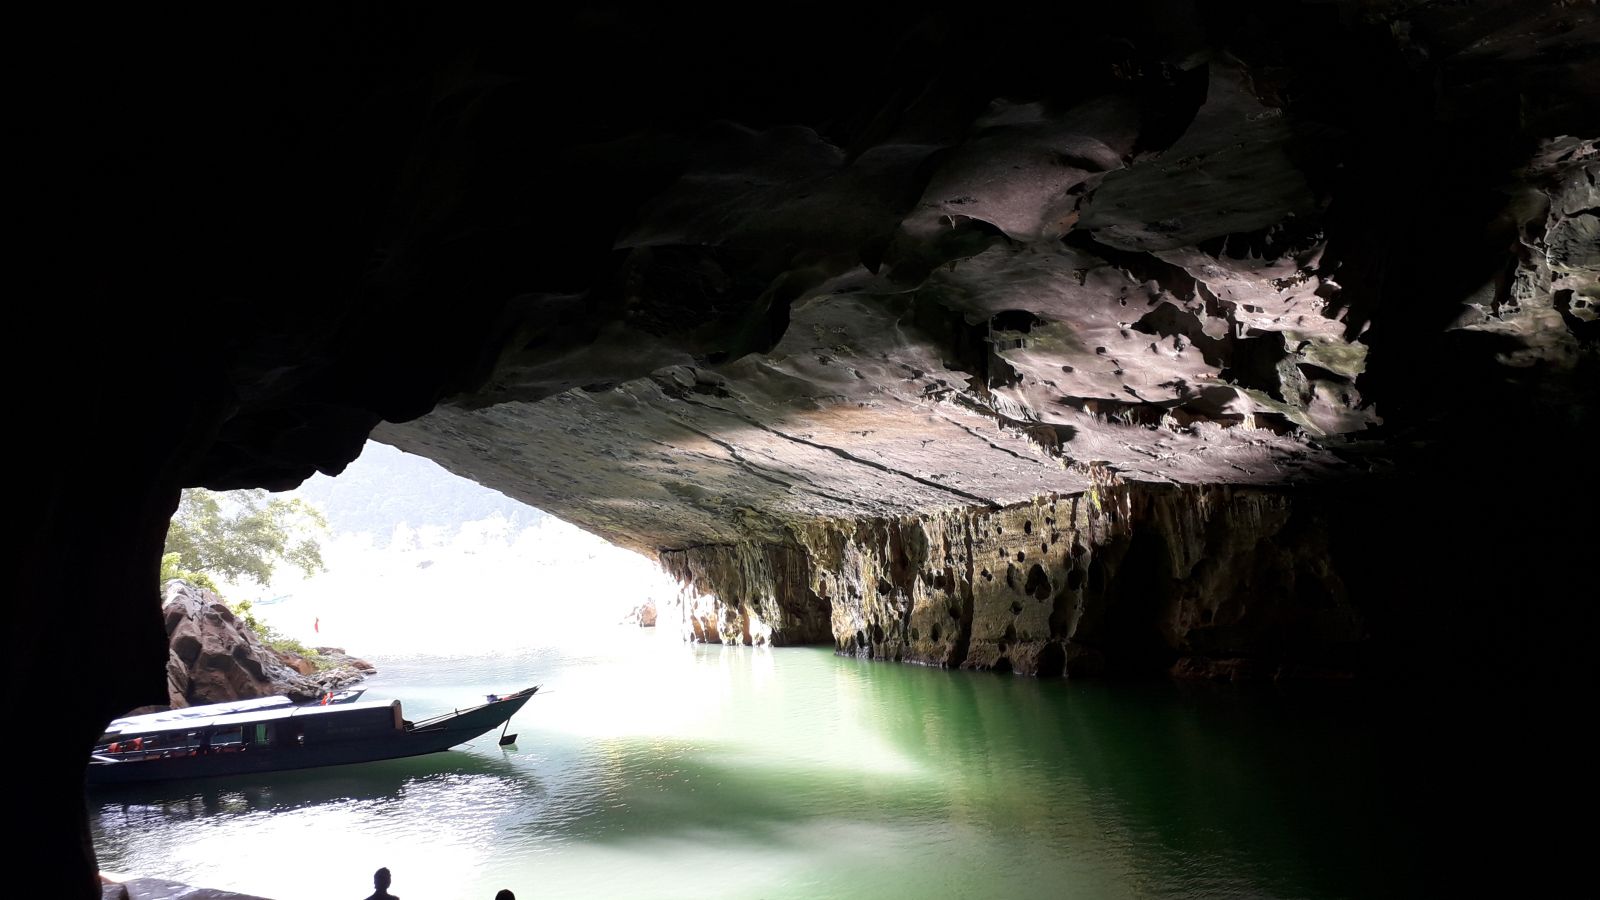 The cave of Phong Nha